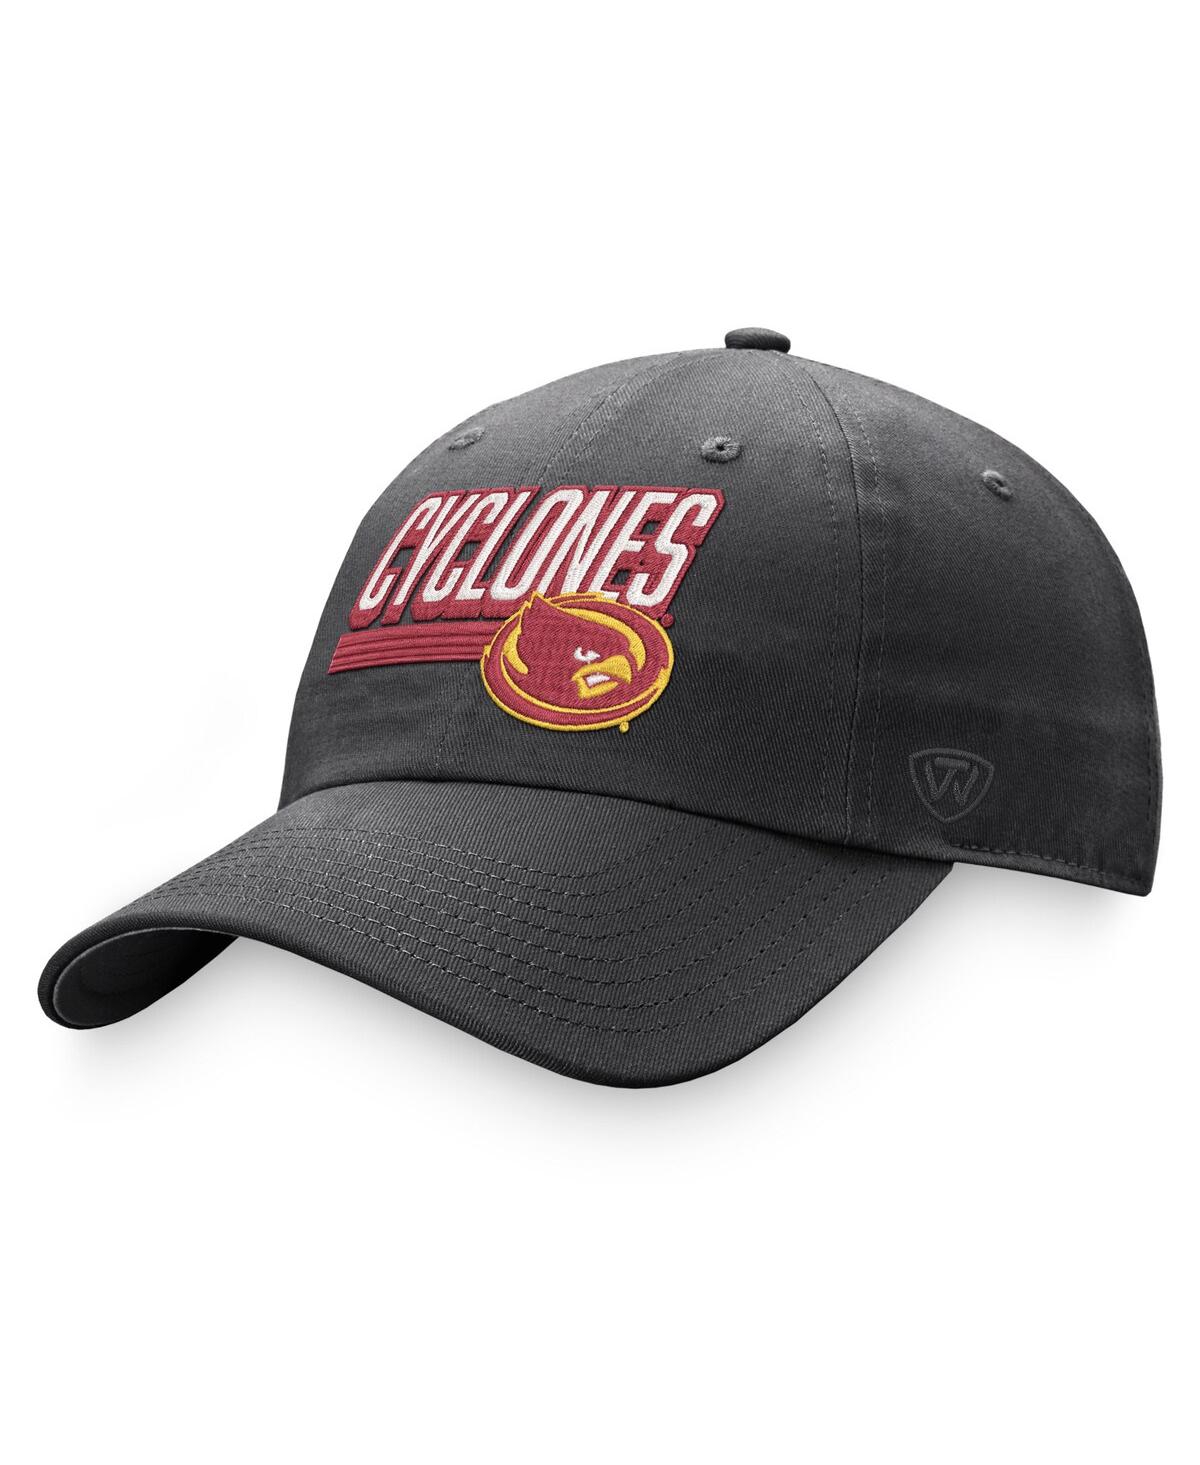 Men's Top of the World Charcoal Iowa State Cyclones Slice Adjustable Hat - Charcoal